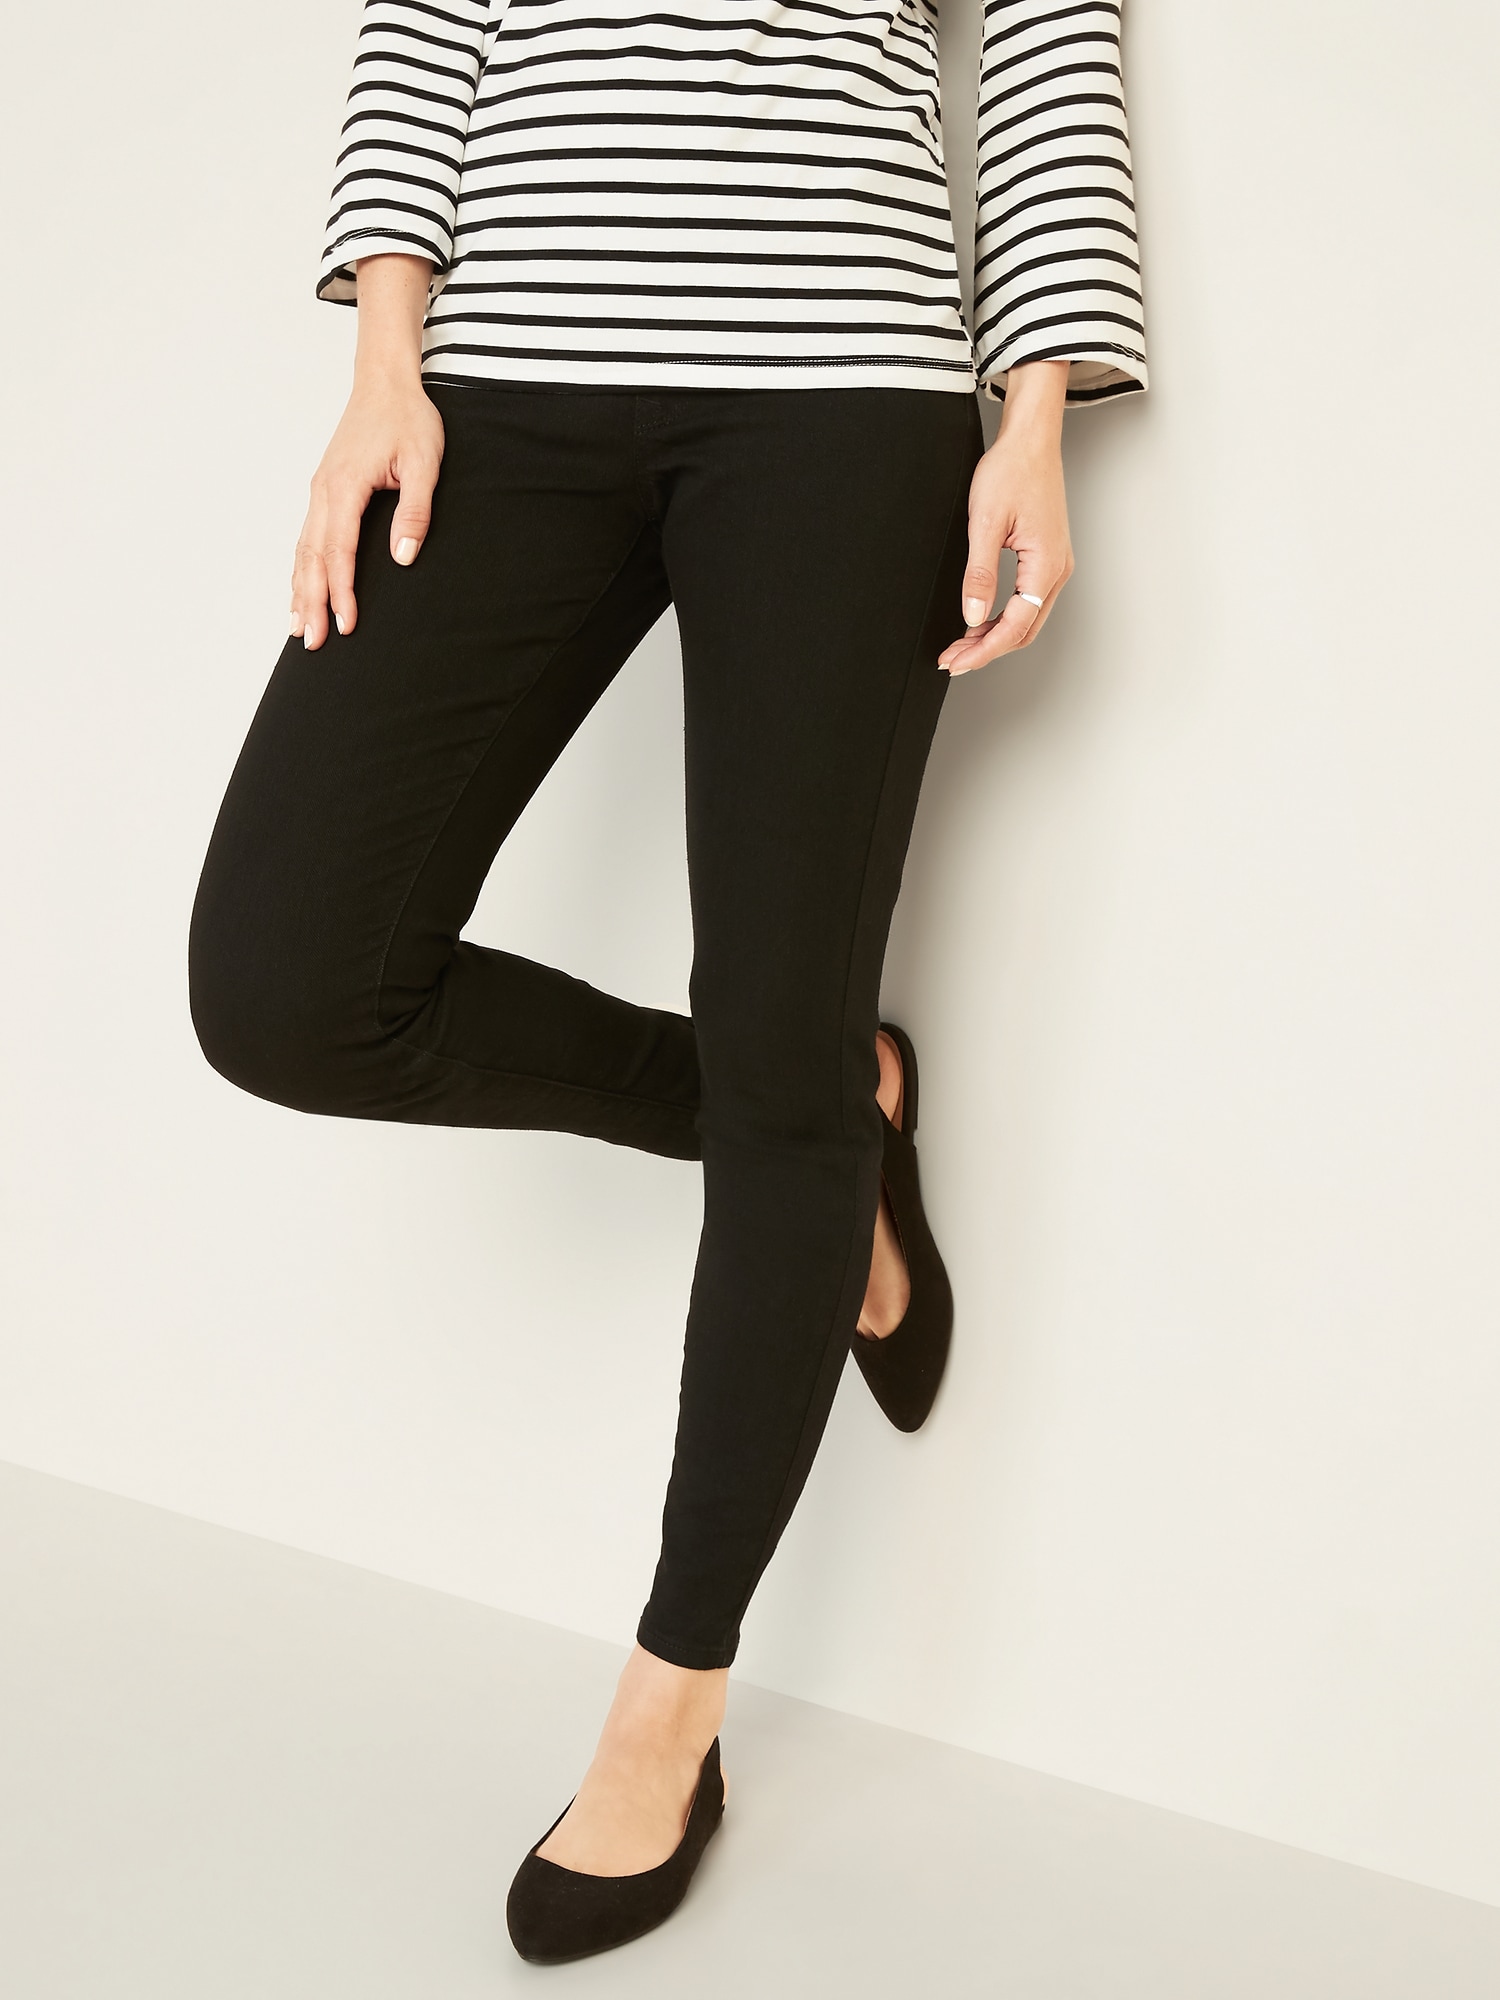 womens jeggings canada